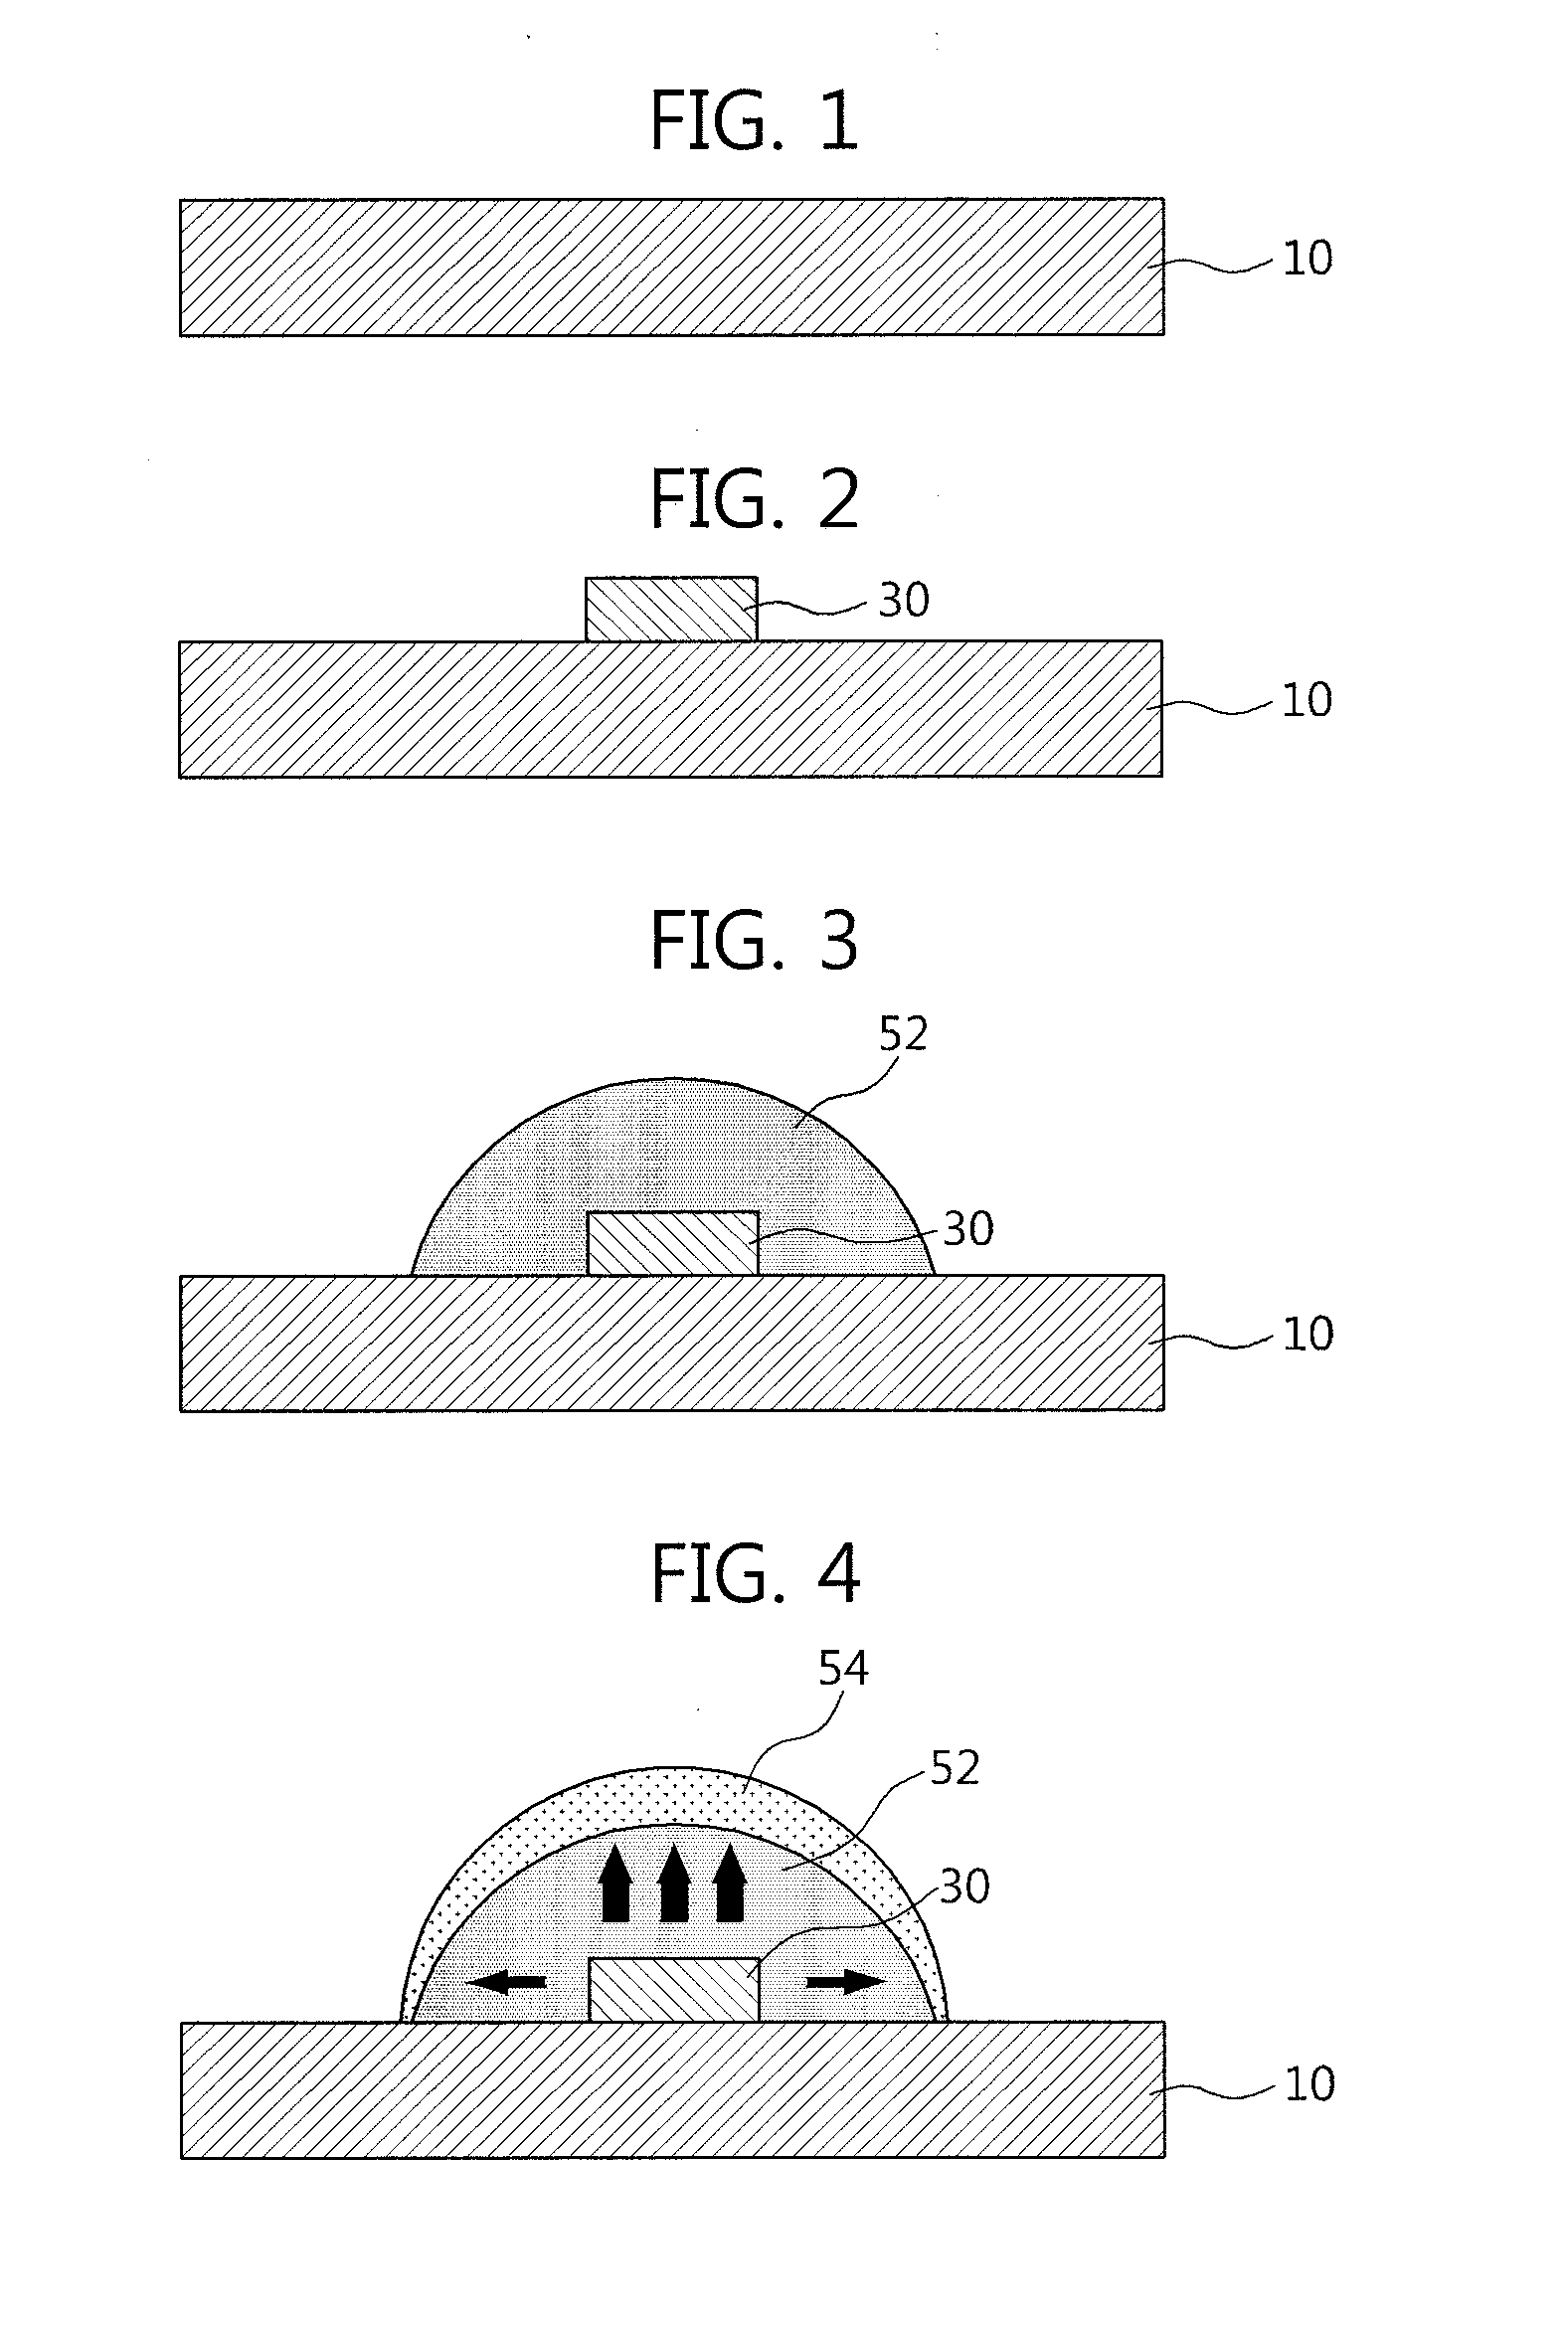 Light-emitting diode having a wavelength conversion material layer, and method for fabricating same